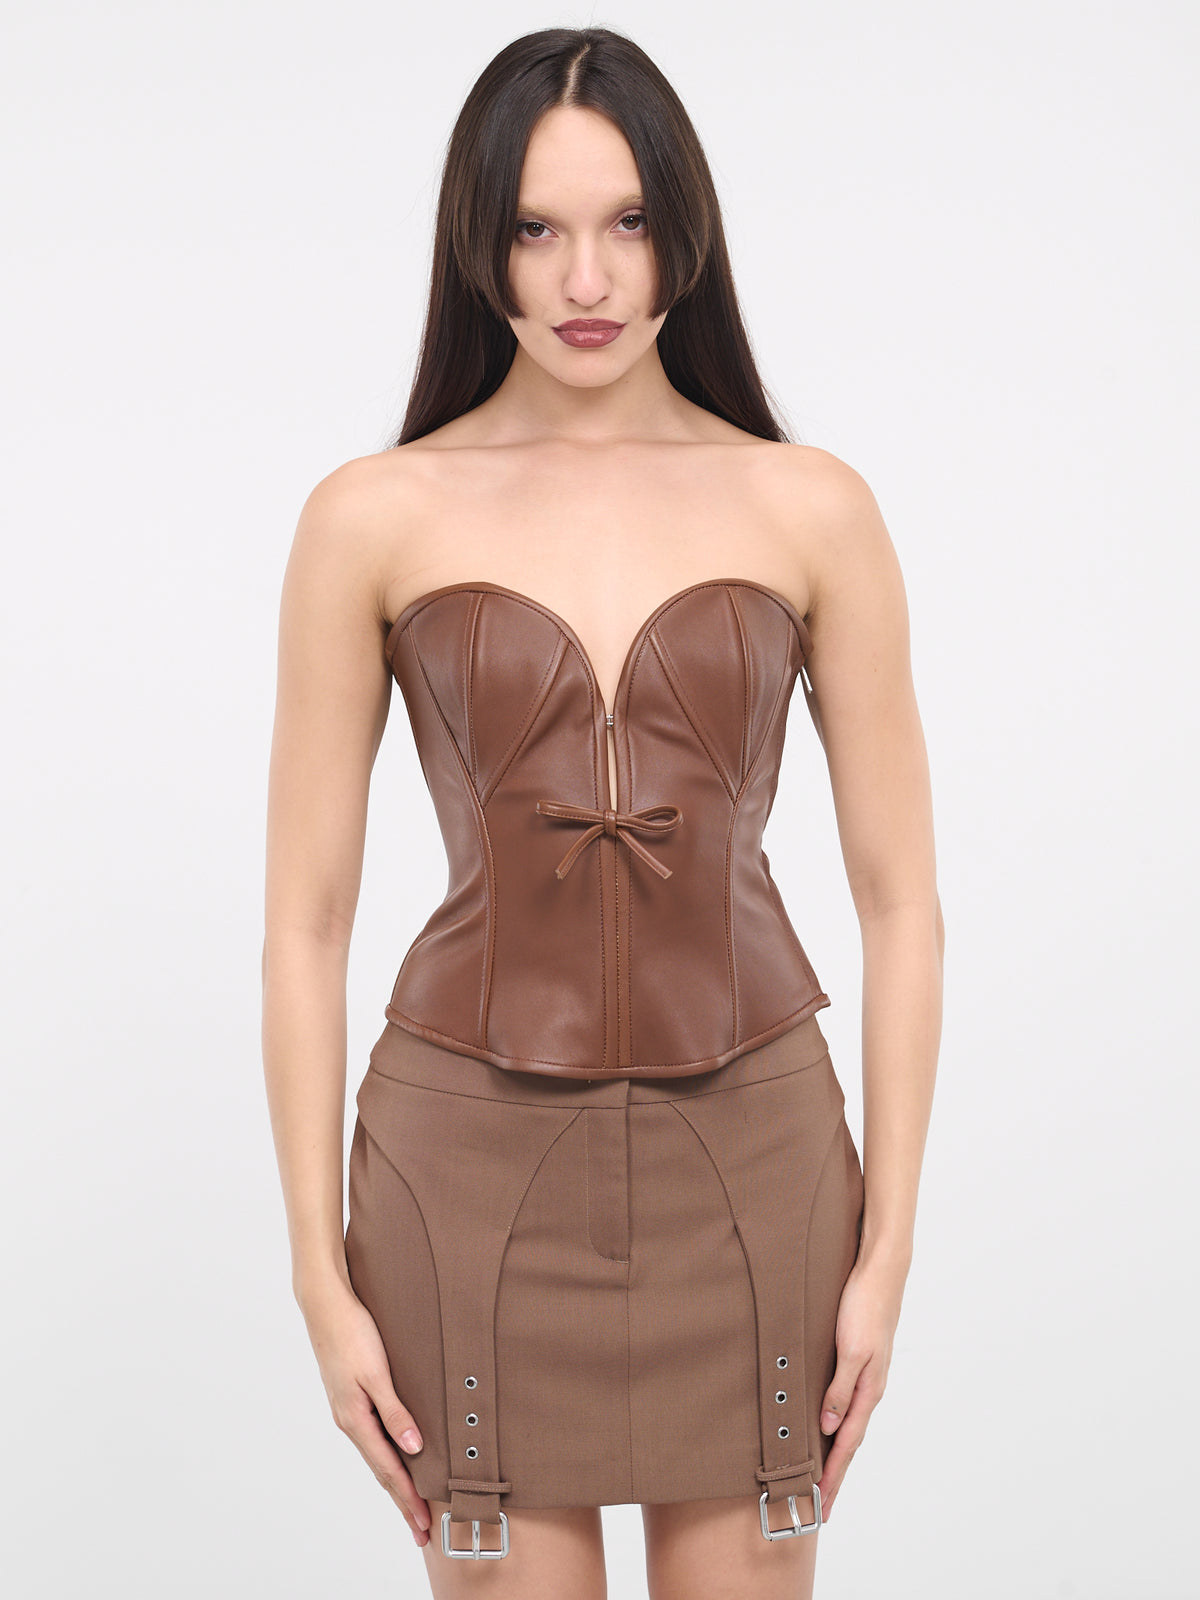 Nappa Leather Bustier Corset (2L045A-N0576-TAUPE-GREY)